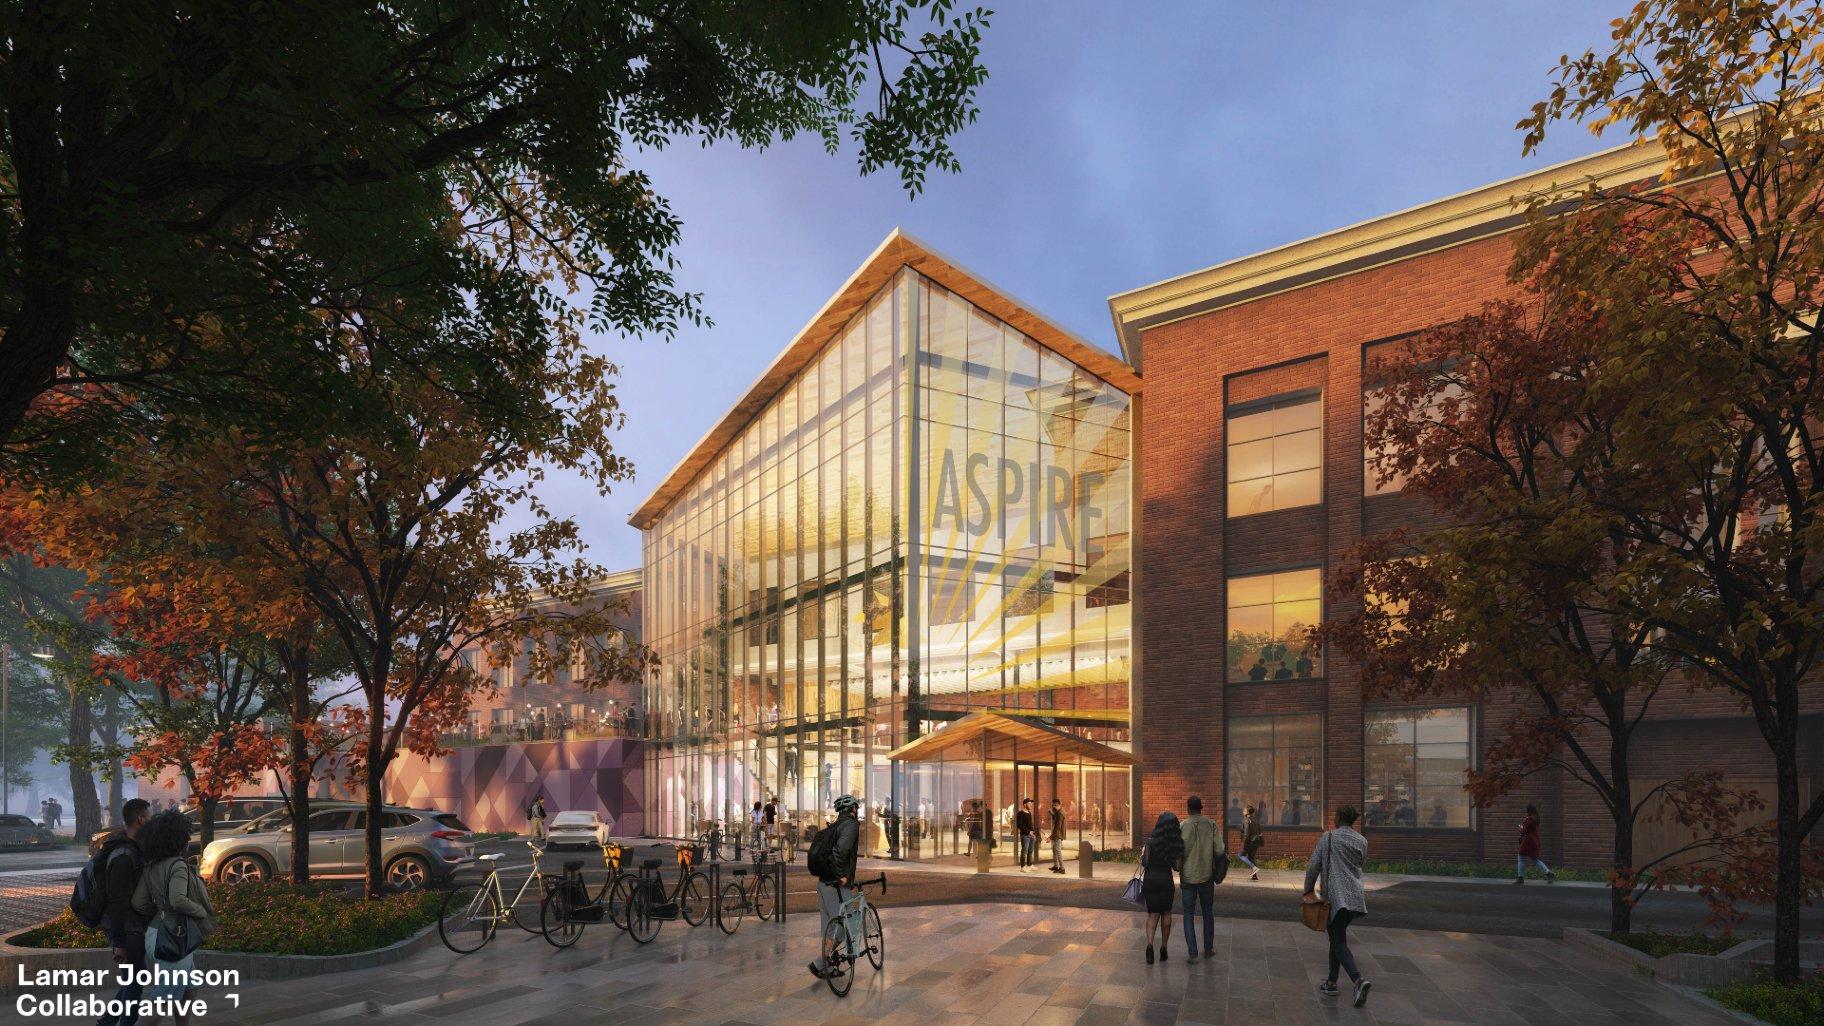 A rendering of the Aspire Center. (Courtesy of Lamar Johnson Collaborative)